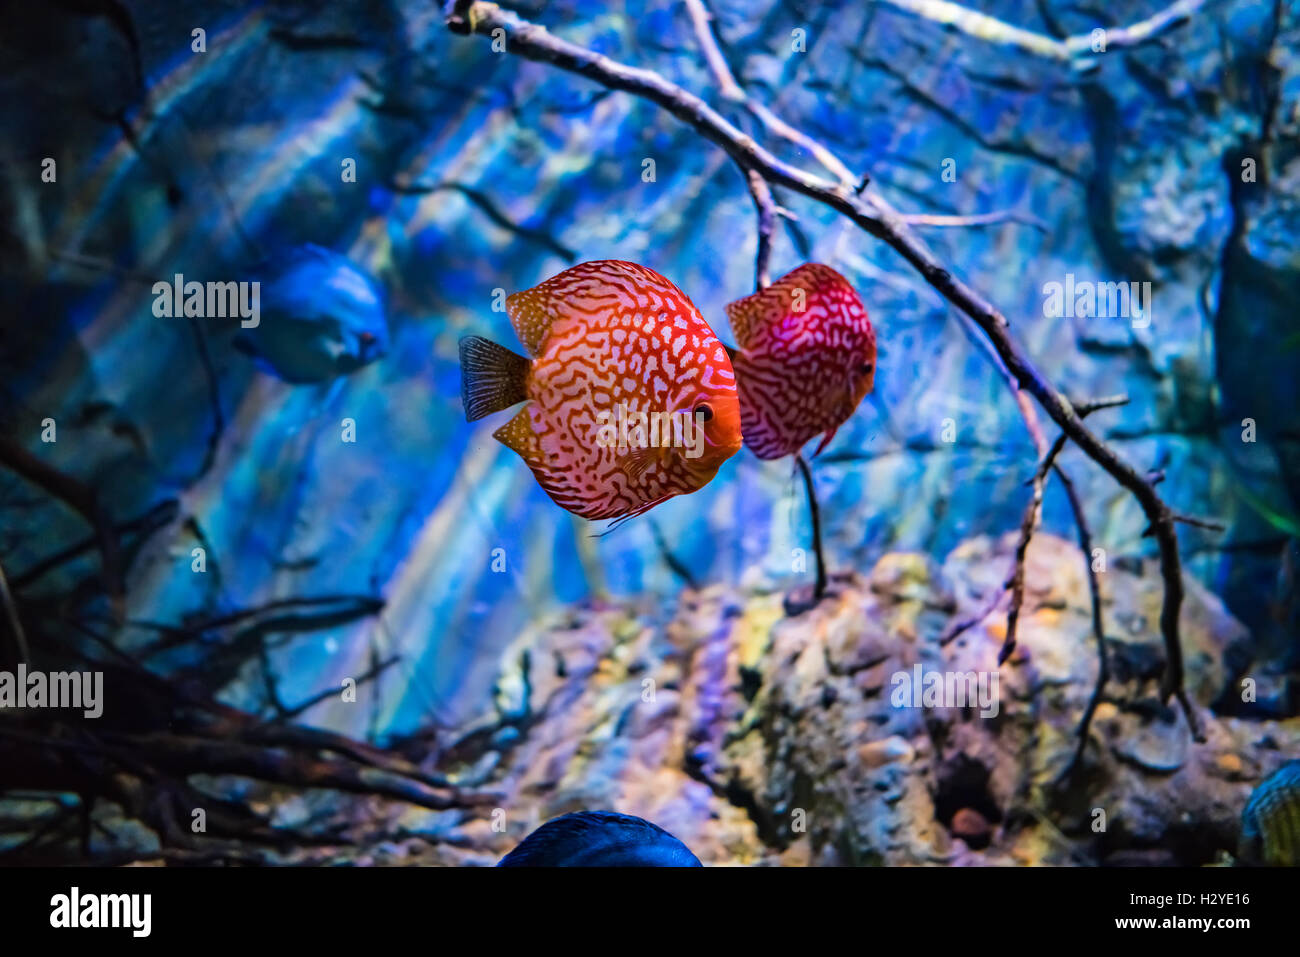 Symphysodon discus in an aquarium on a blue background Stock Photo